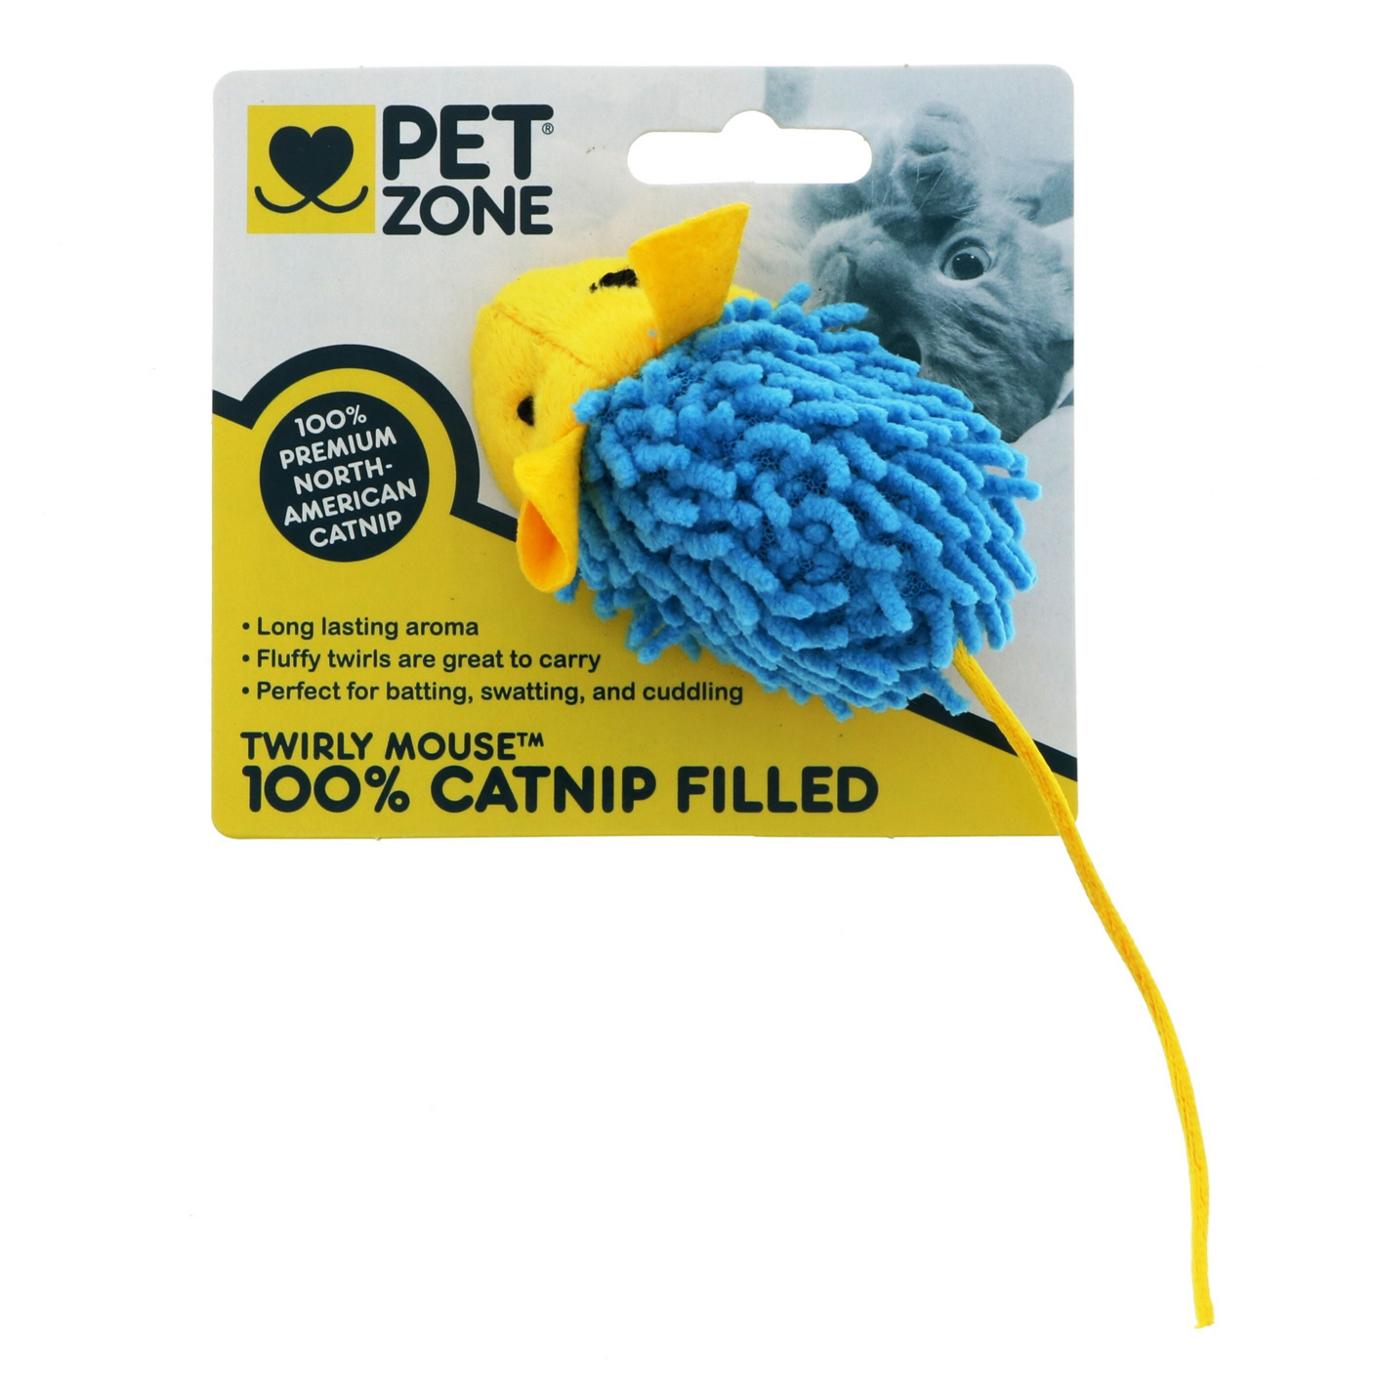 Pet Zone Catnip Filled Twirly Mouse, Assorted Colors; image 1 of 2